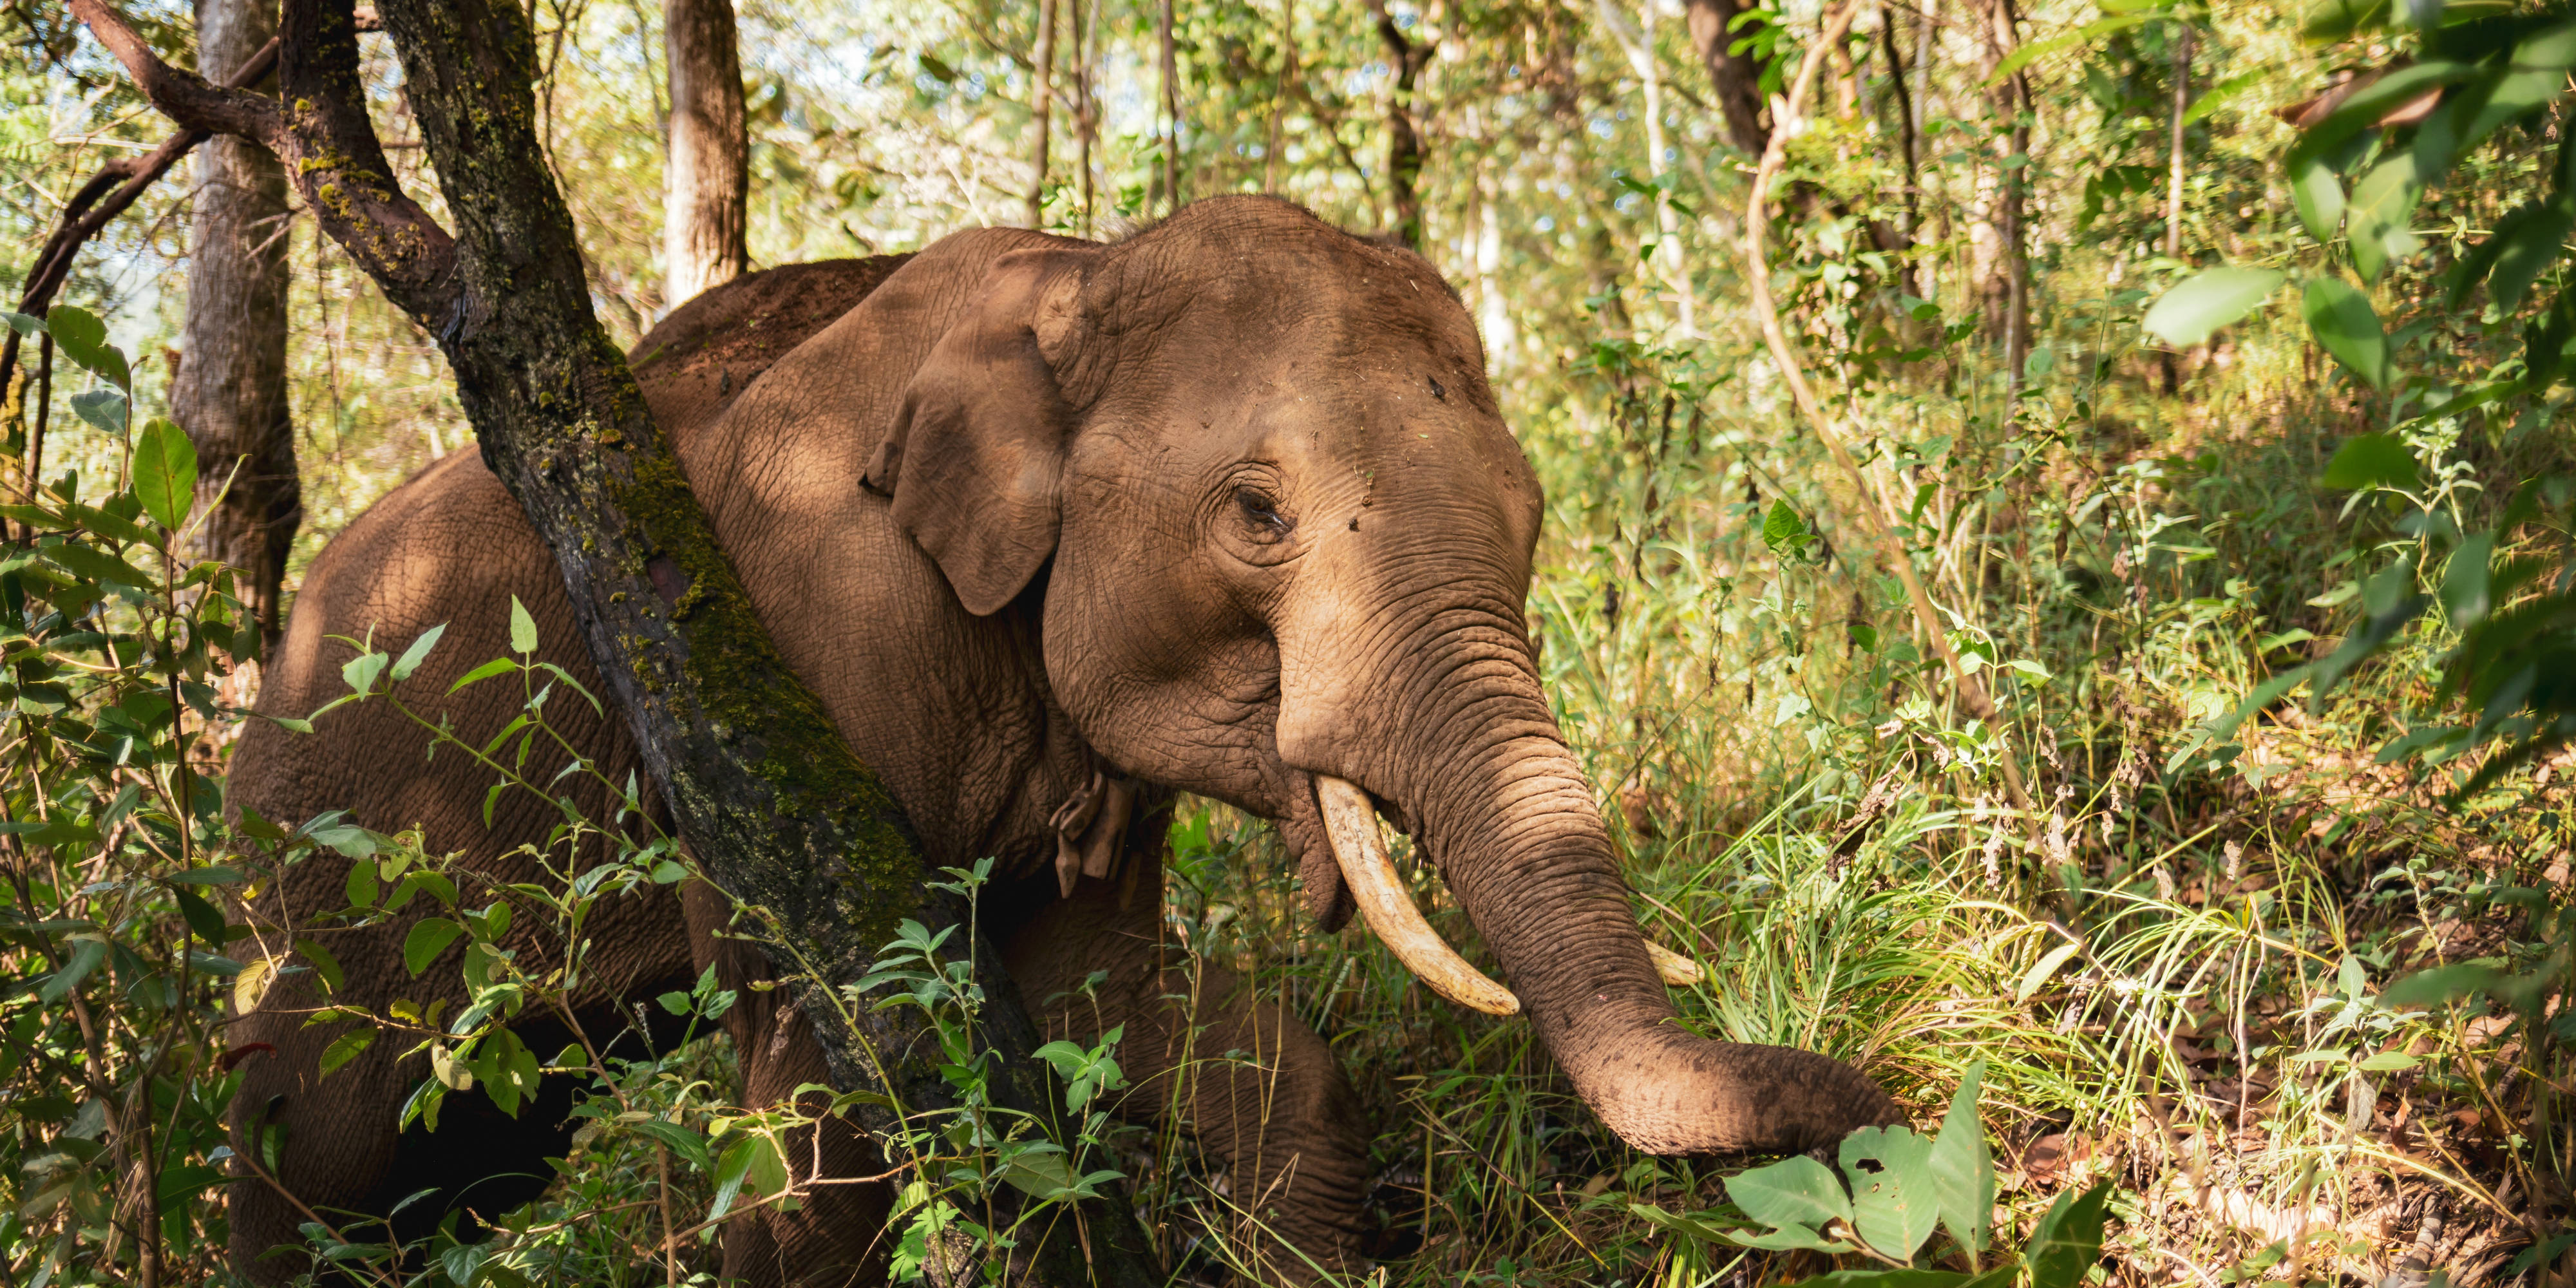 An Asian elephant forages in the forest of Chiang Mai province in Thailand. Volunteering with these gentle giants is one of the best animal volunteer programs abroad.